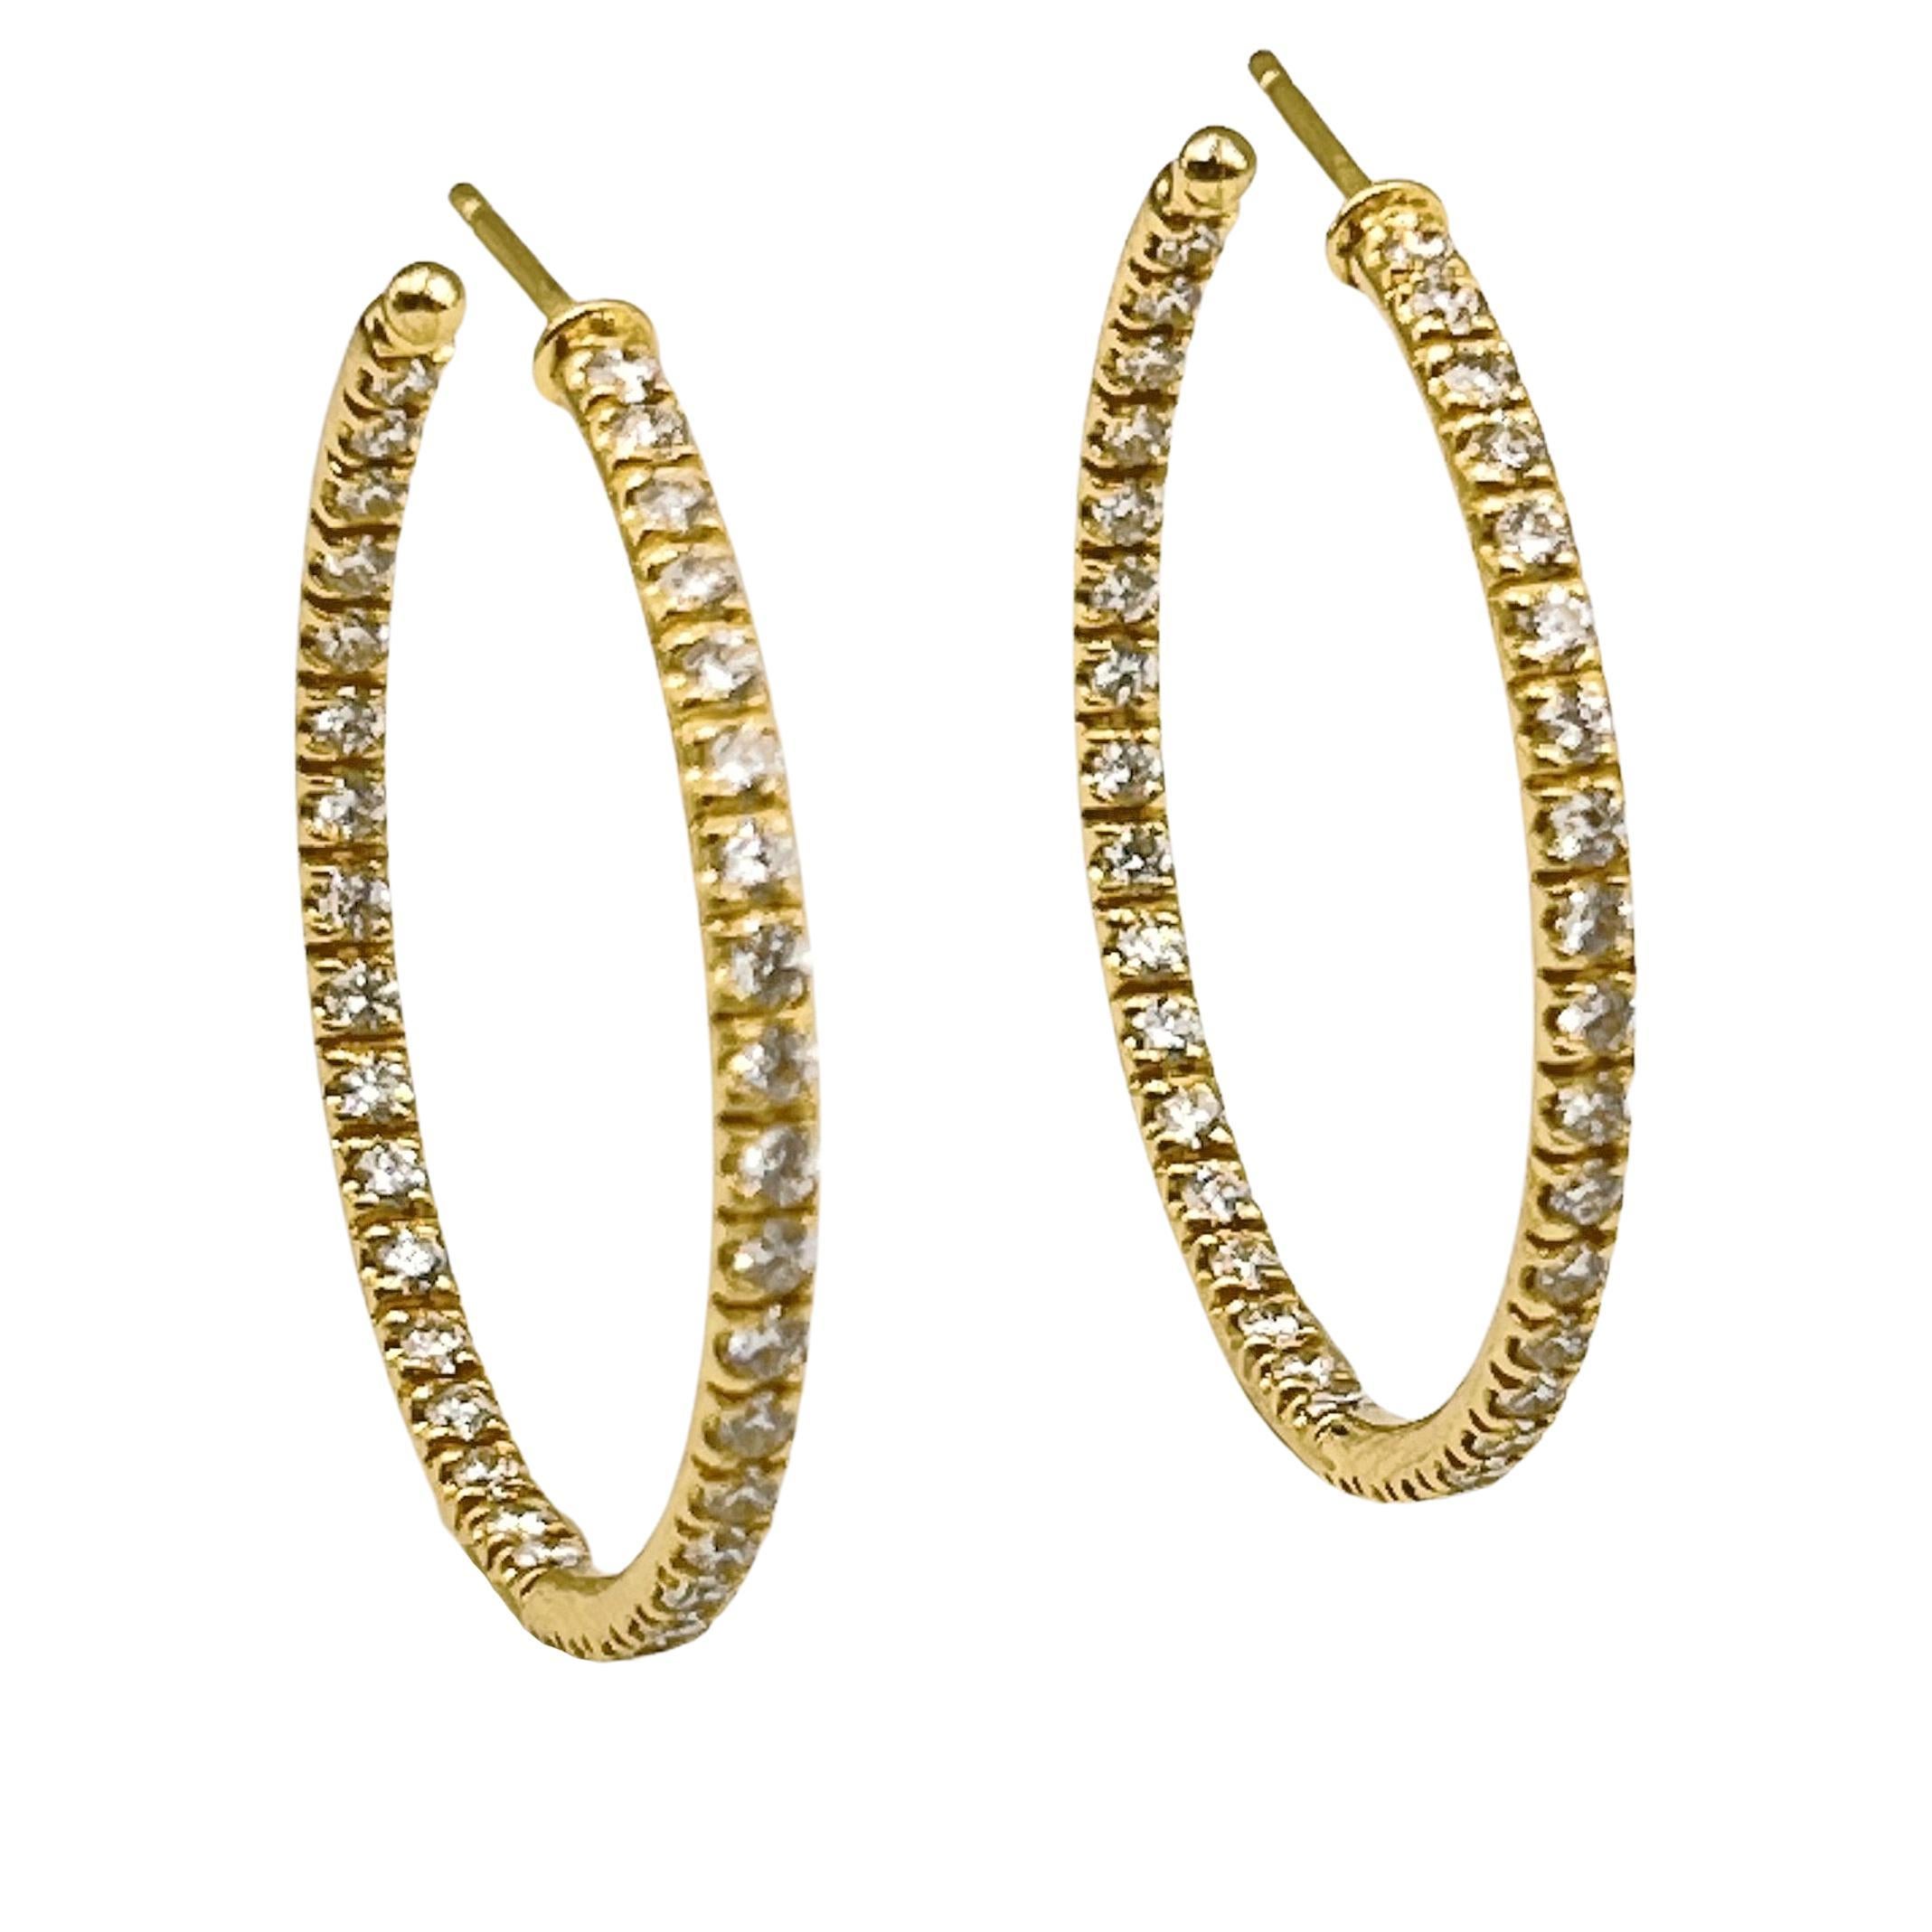 18kt yellow gold polished hoop earrings with diamonds set to the front on the outside and inside of the hoop.  Seventy-four round brilliant-cut diamonds weighing approximately 1.85 total carats (G-H color and VS1-VS2 clarity).  Pierced posts with